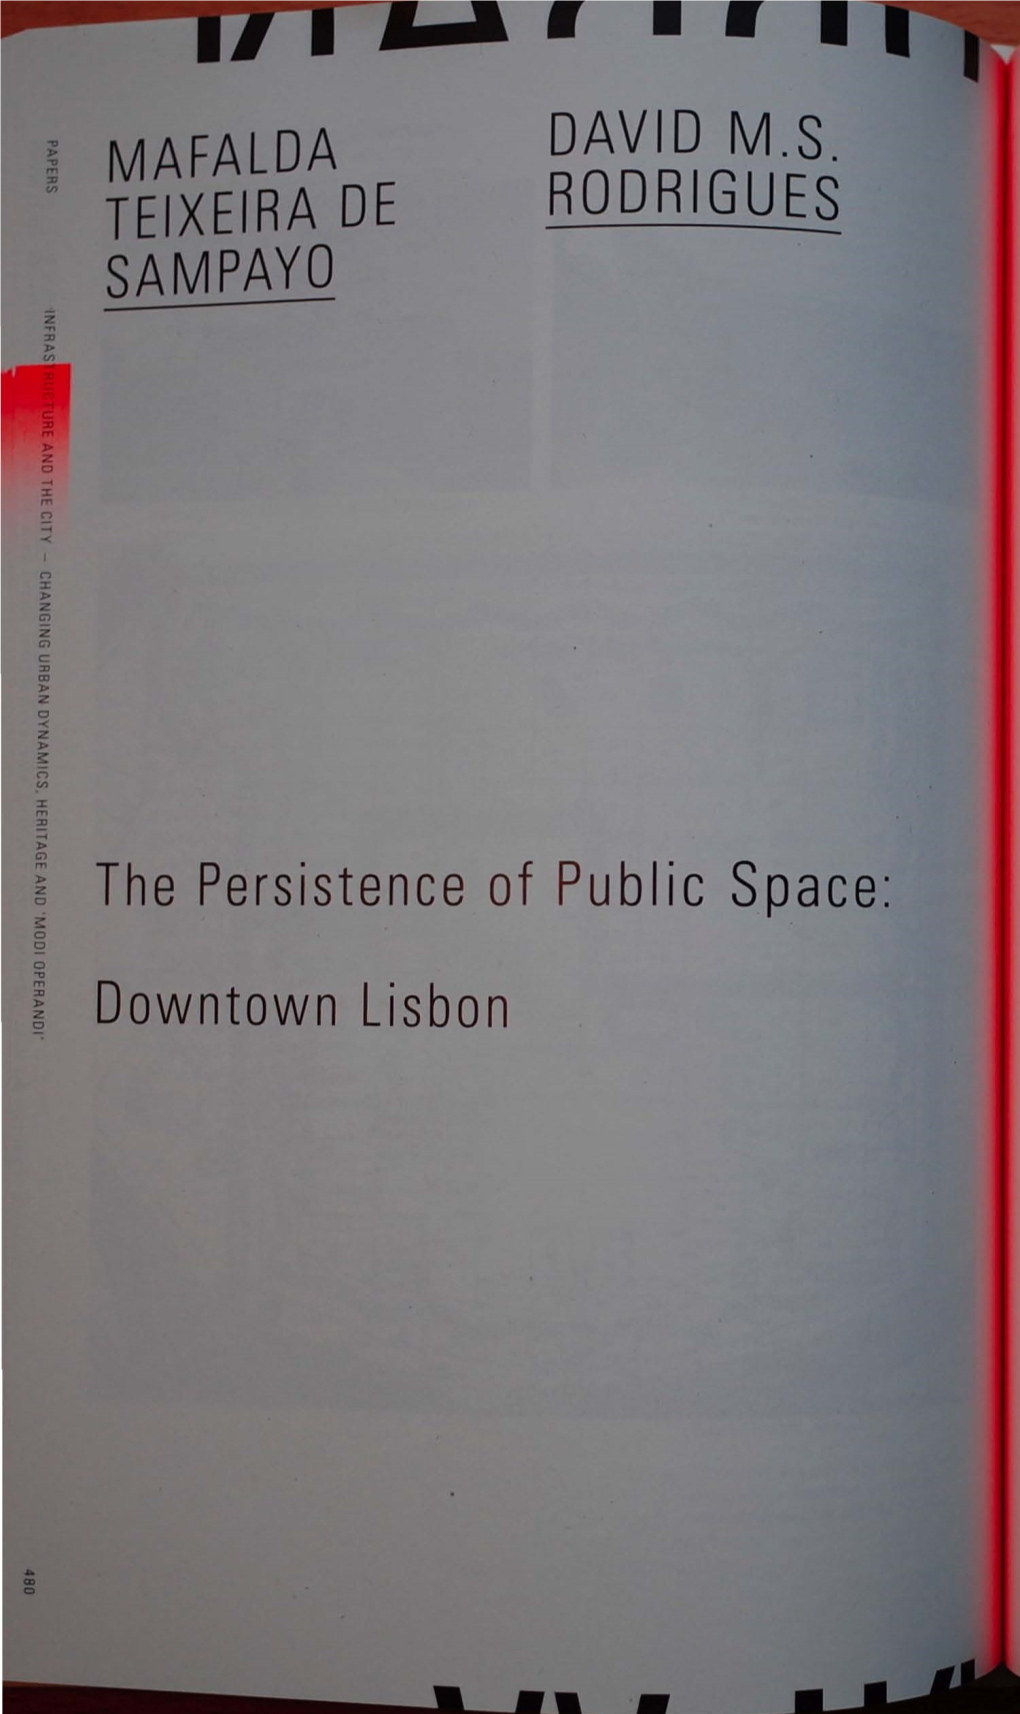 The Persistence of Public Space: Downtown Lisbon